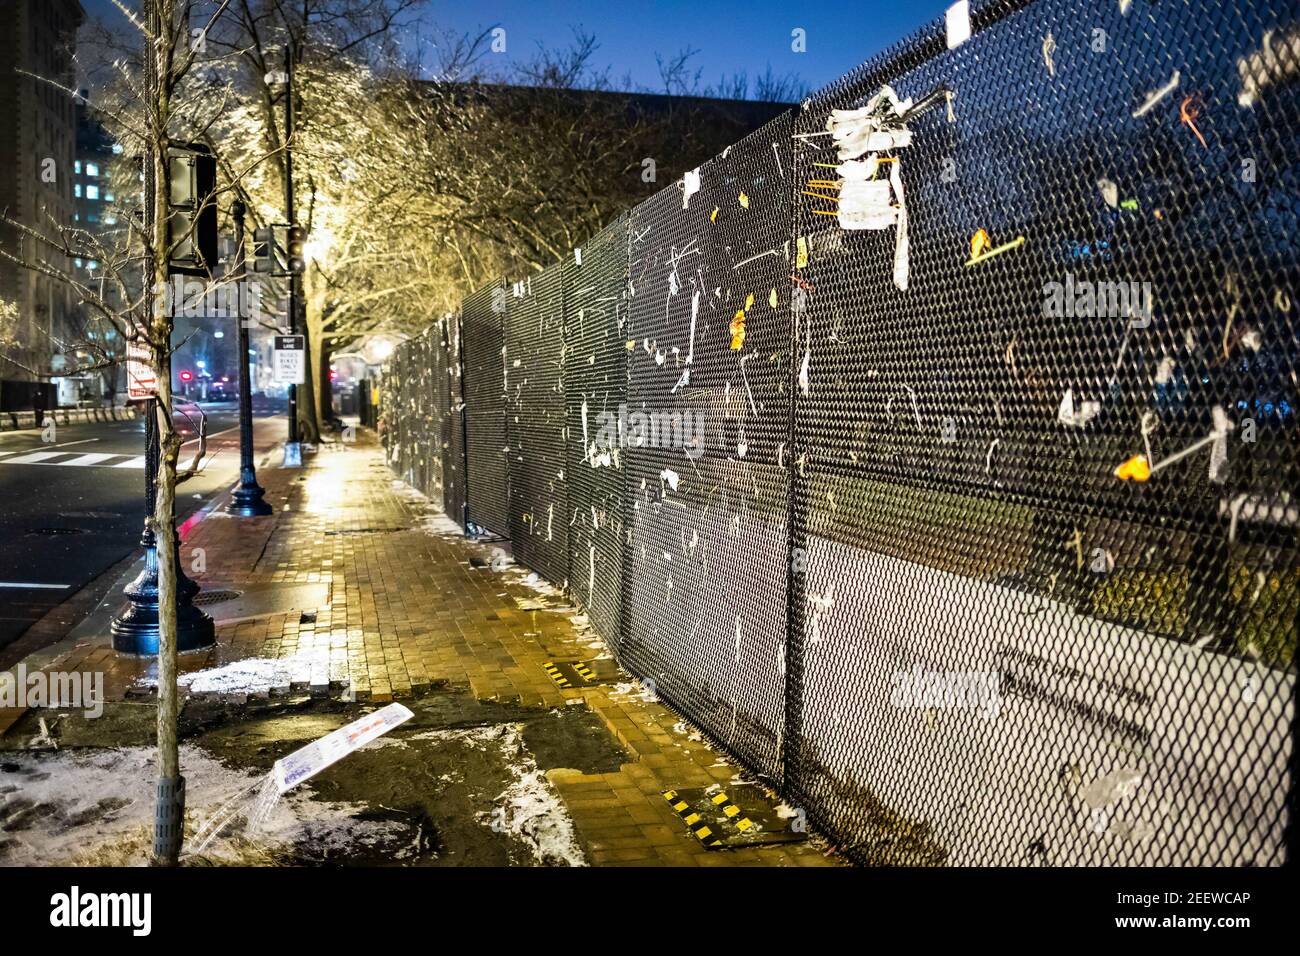 Security fence surrounds White house building after Capitol Hill riots at night Stock Photo